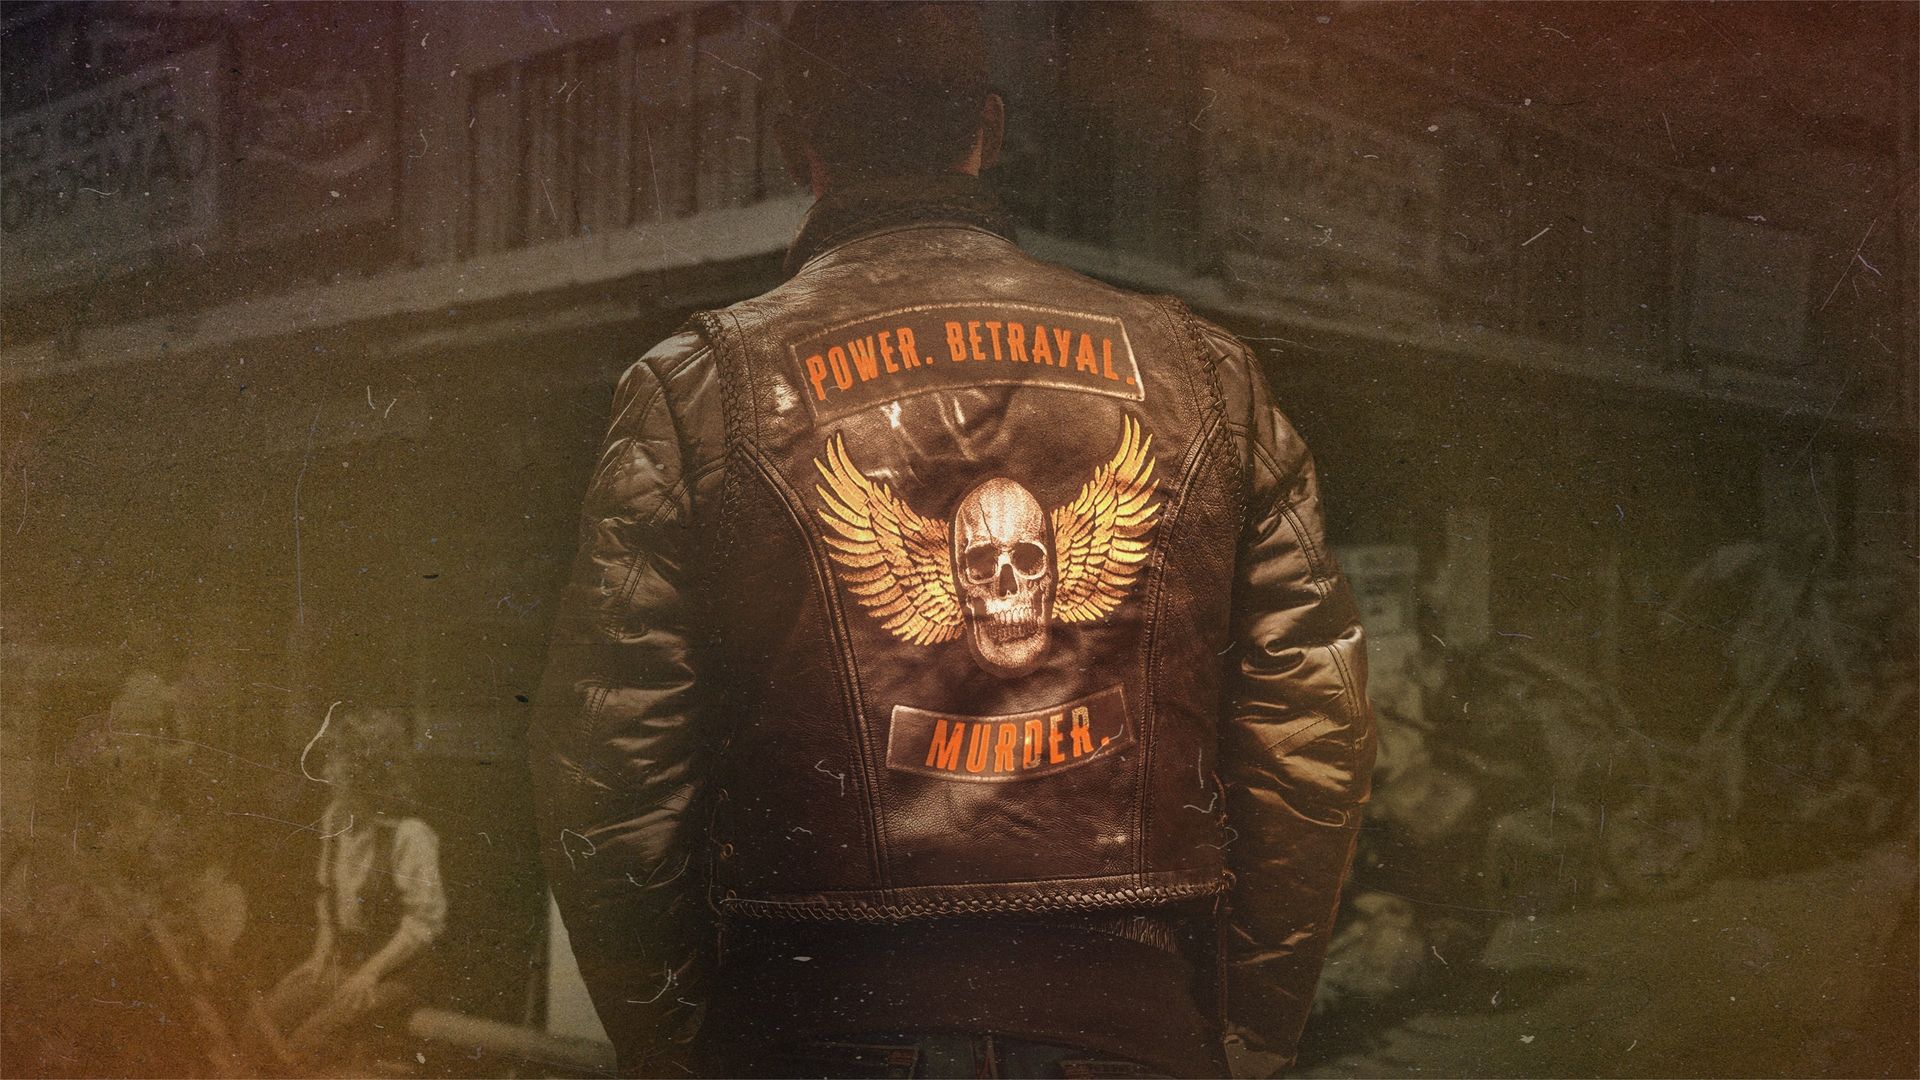 Secrets of the Hells Angels background